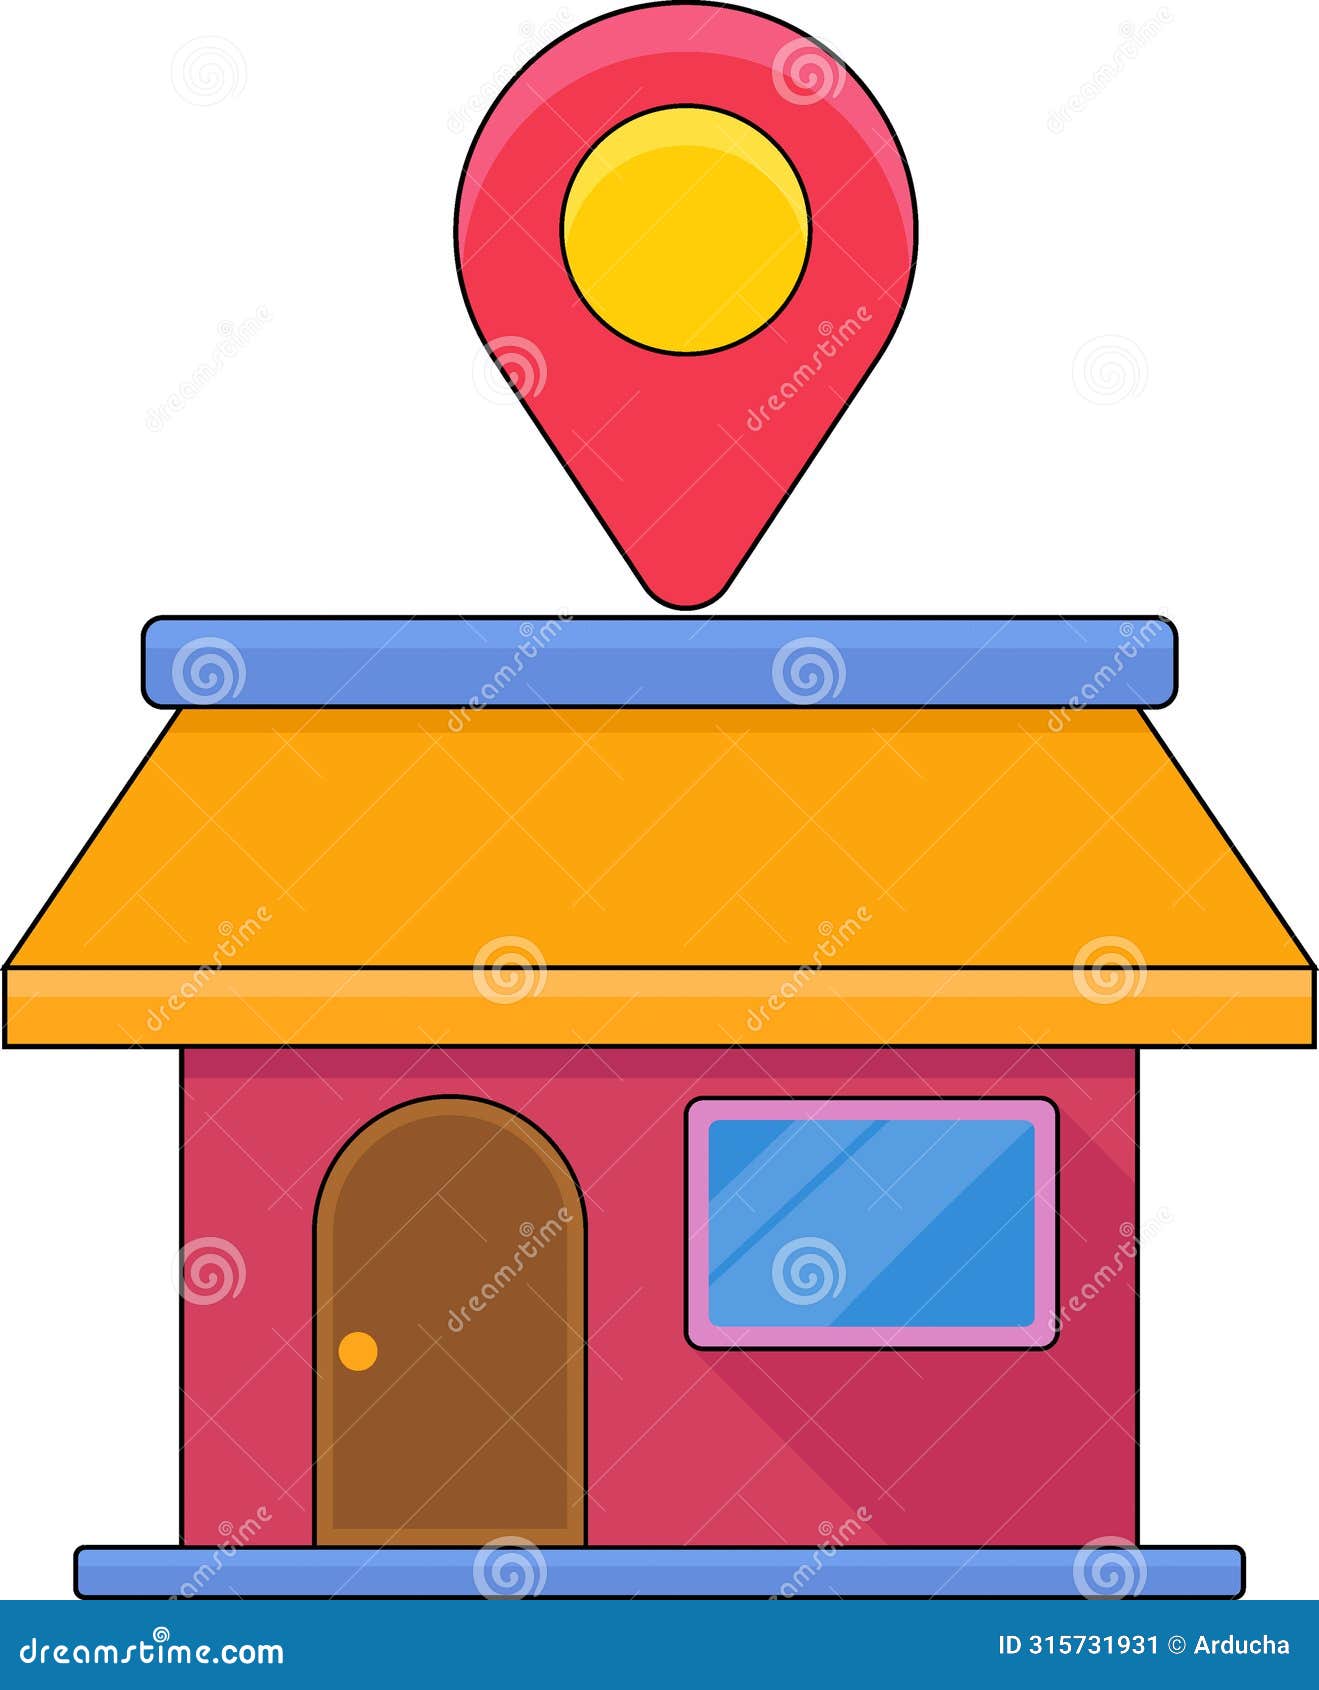 illustrative image of the location icon, the shop address has been recorded on the gps map